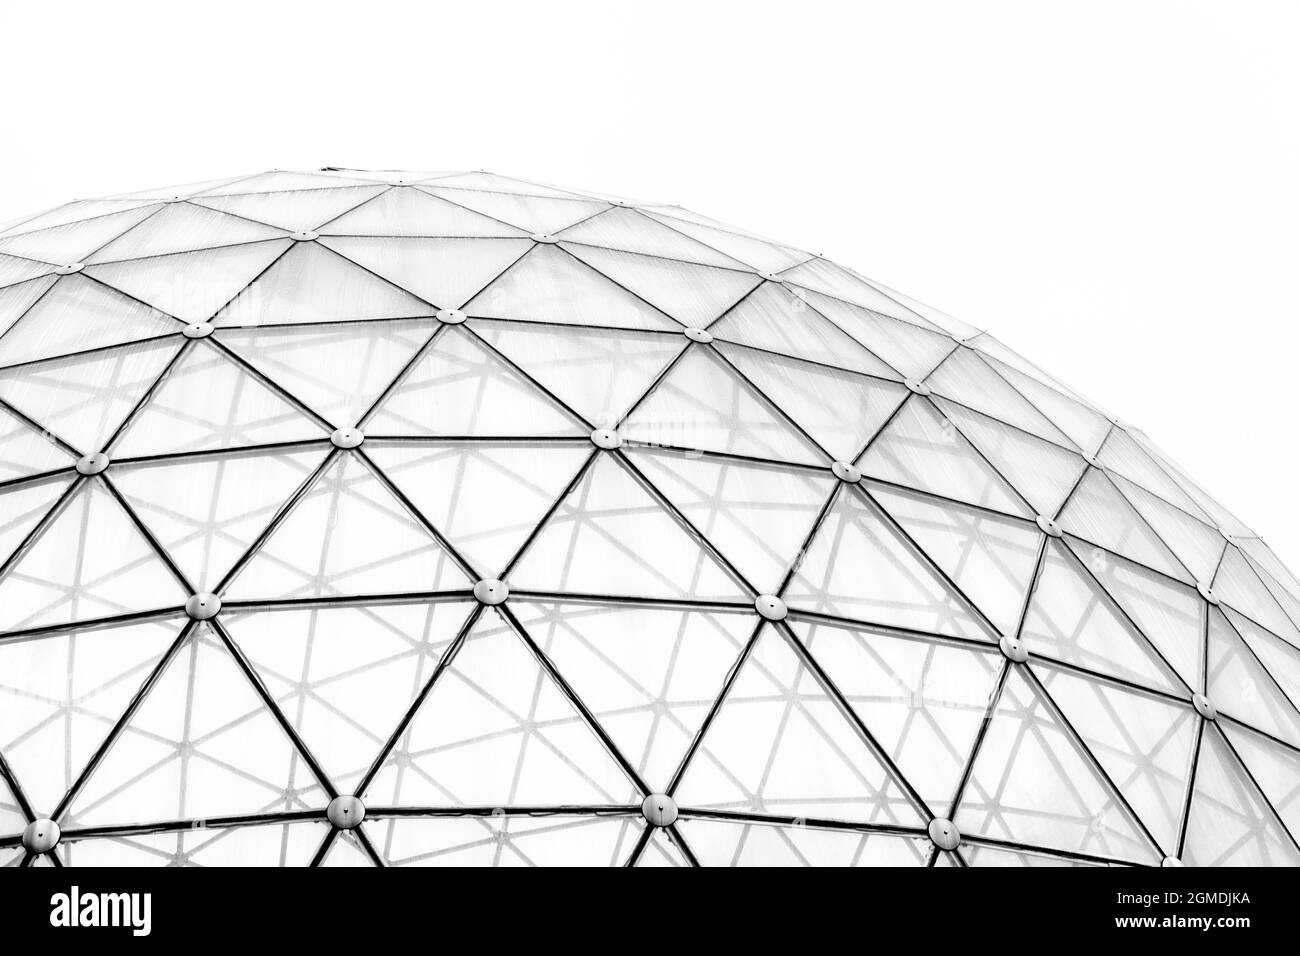 Merkine, Lithuania - 31 August, 2021: abstract view of the glass dome of the Pyramid of Merkine in Lithuania Stock Photo